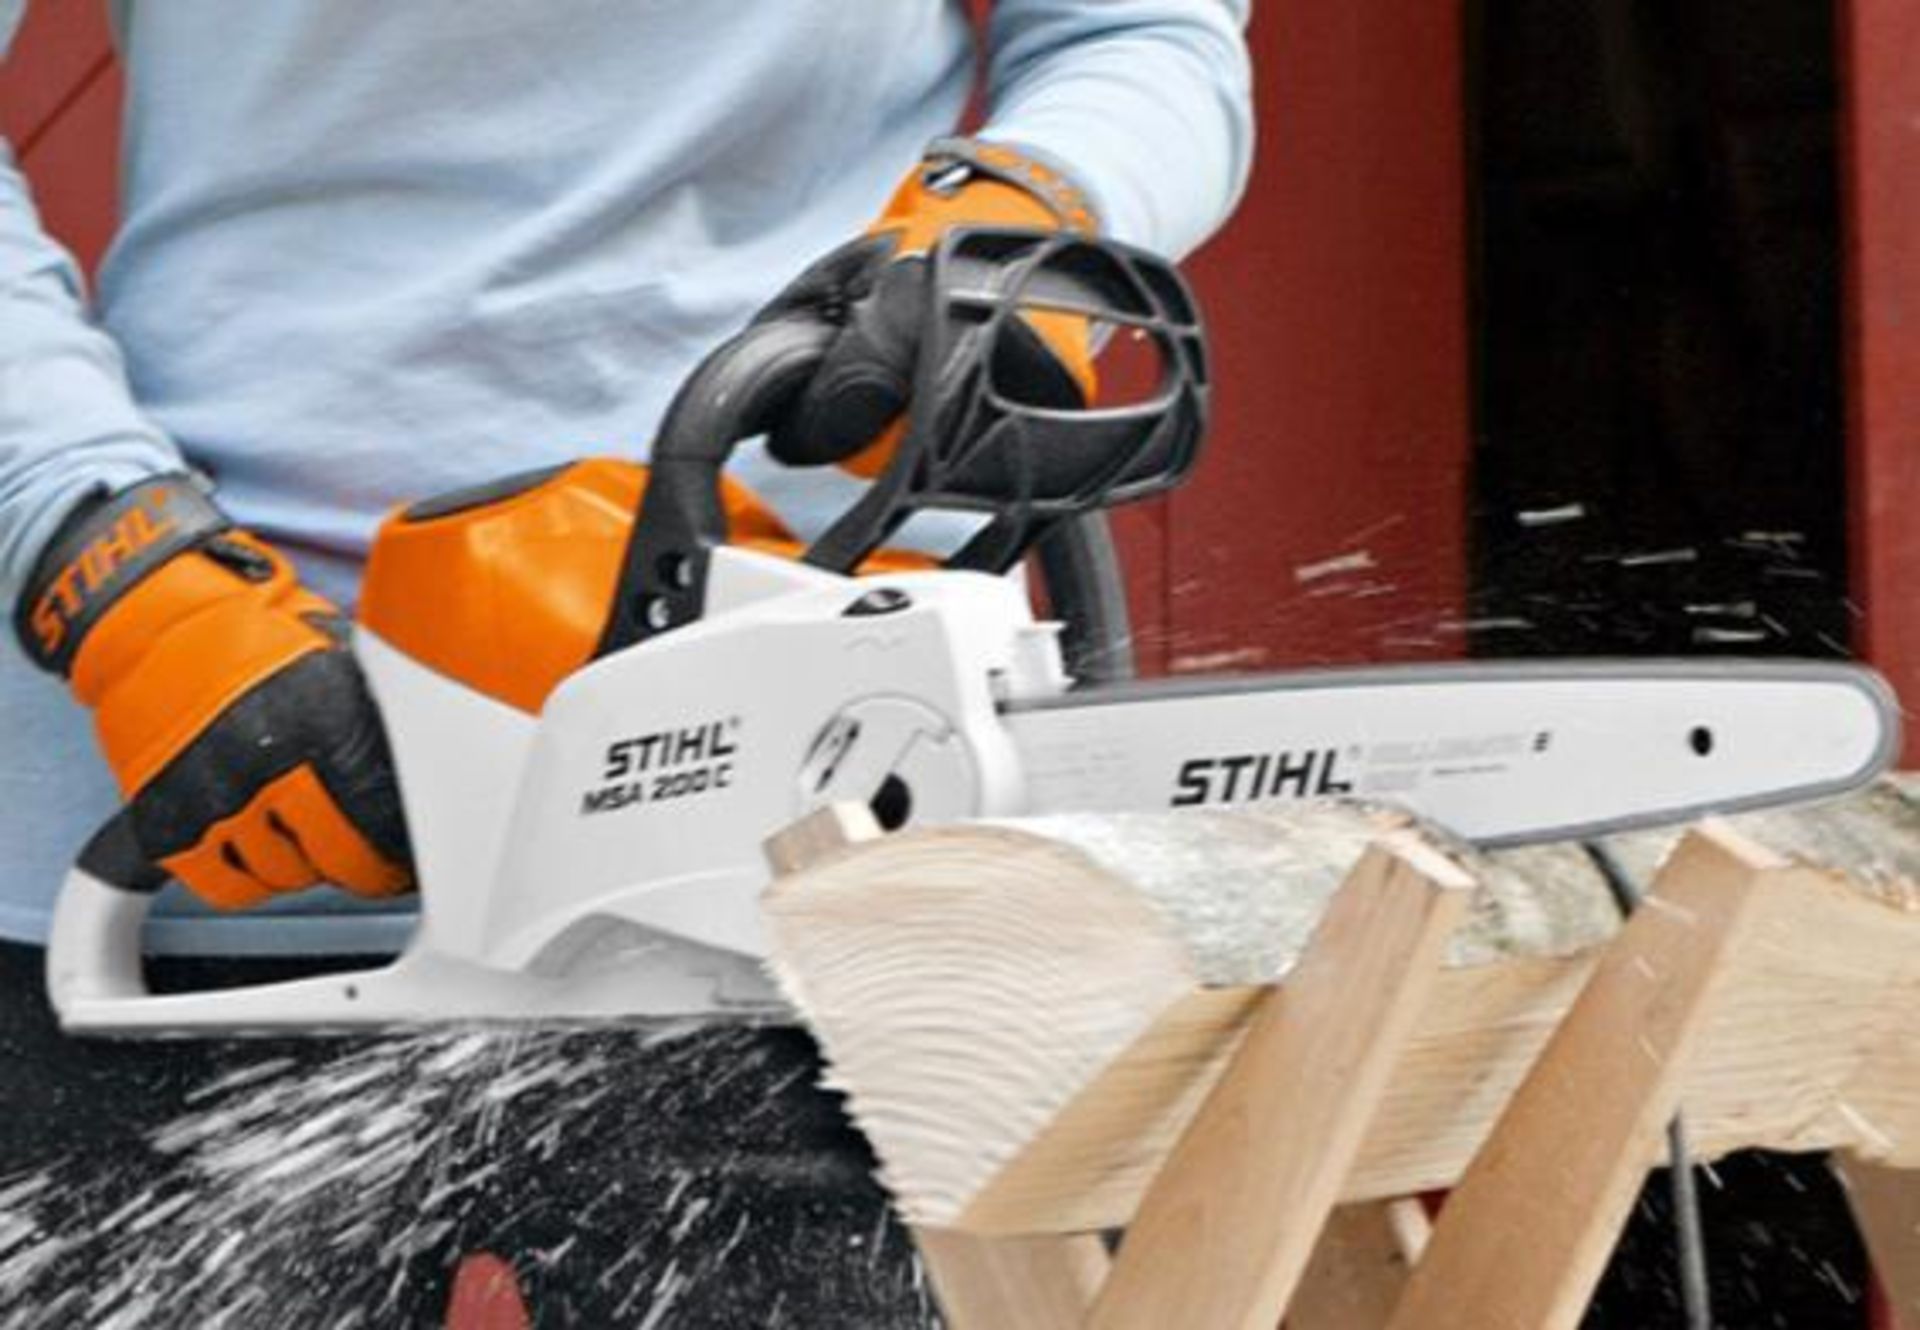 NEW AND UNUSED STIHL MSA 200C BATTERY OPERATED CORDLESS CHAINSAW, 14" BAR AND CHAIN *NO VAT* - Image 3 of 3